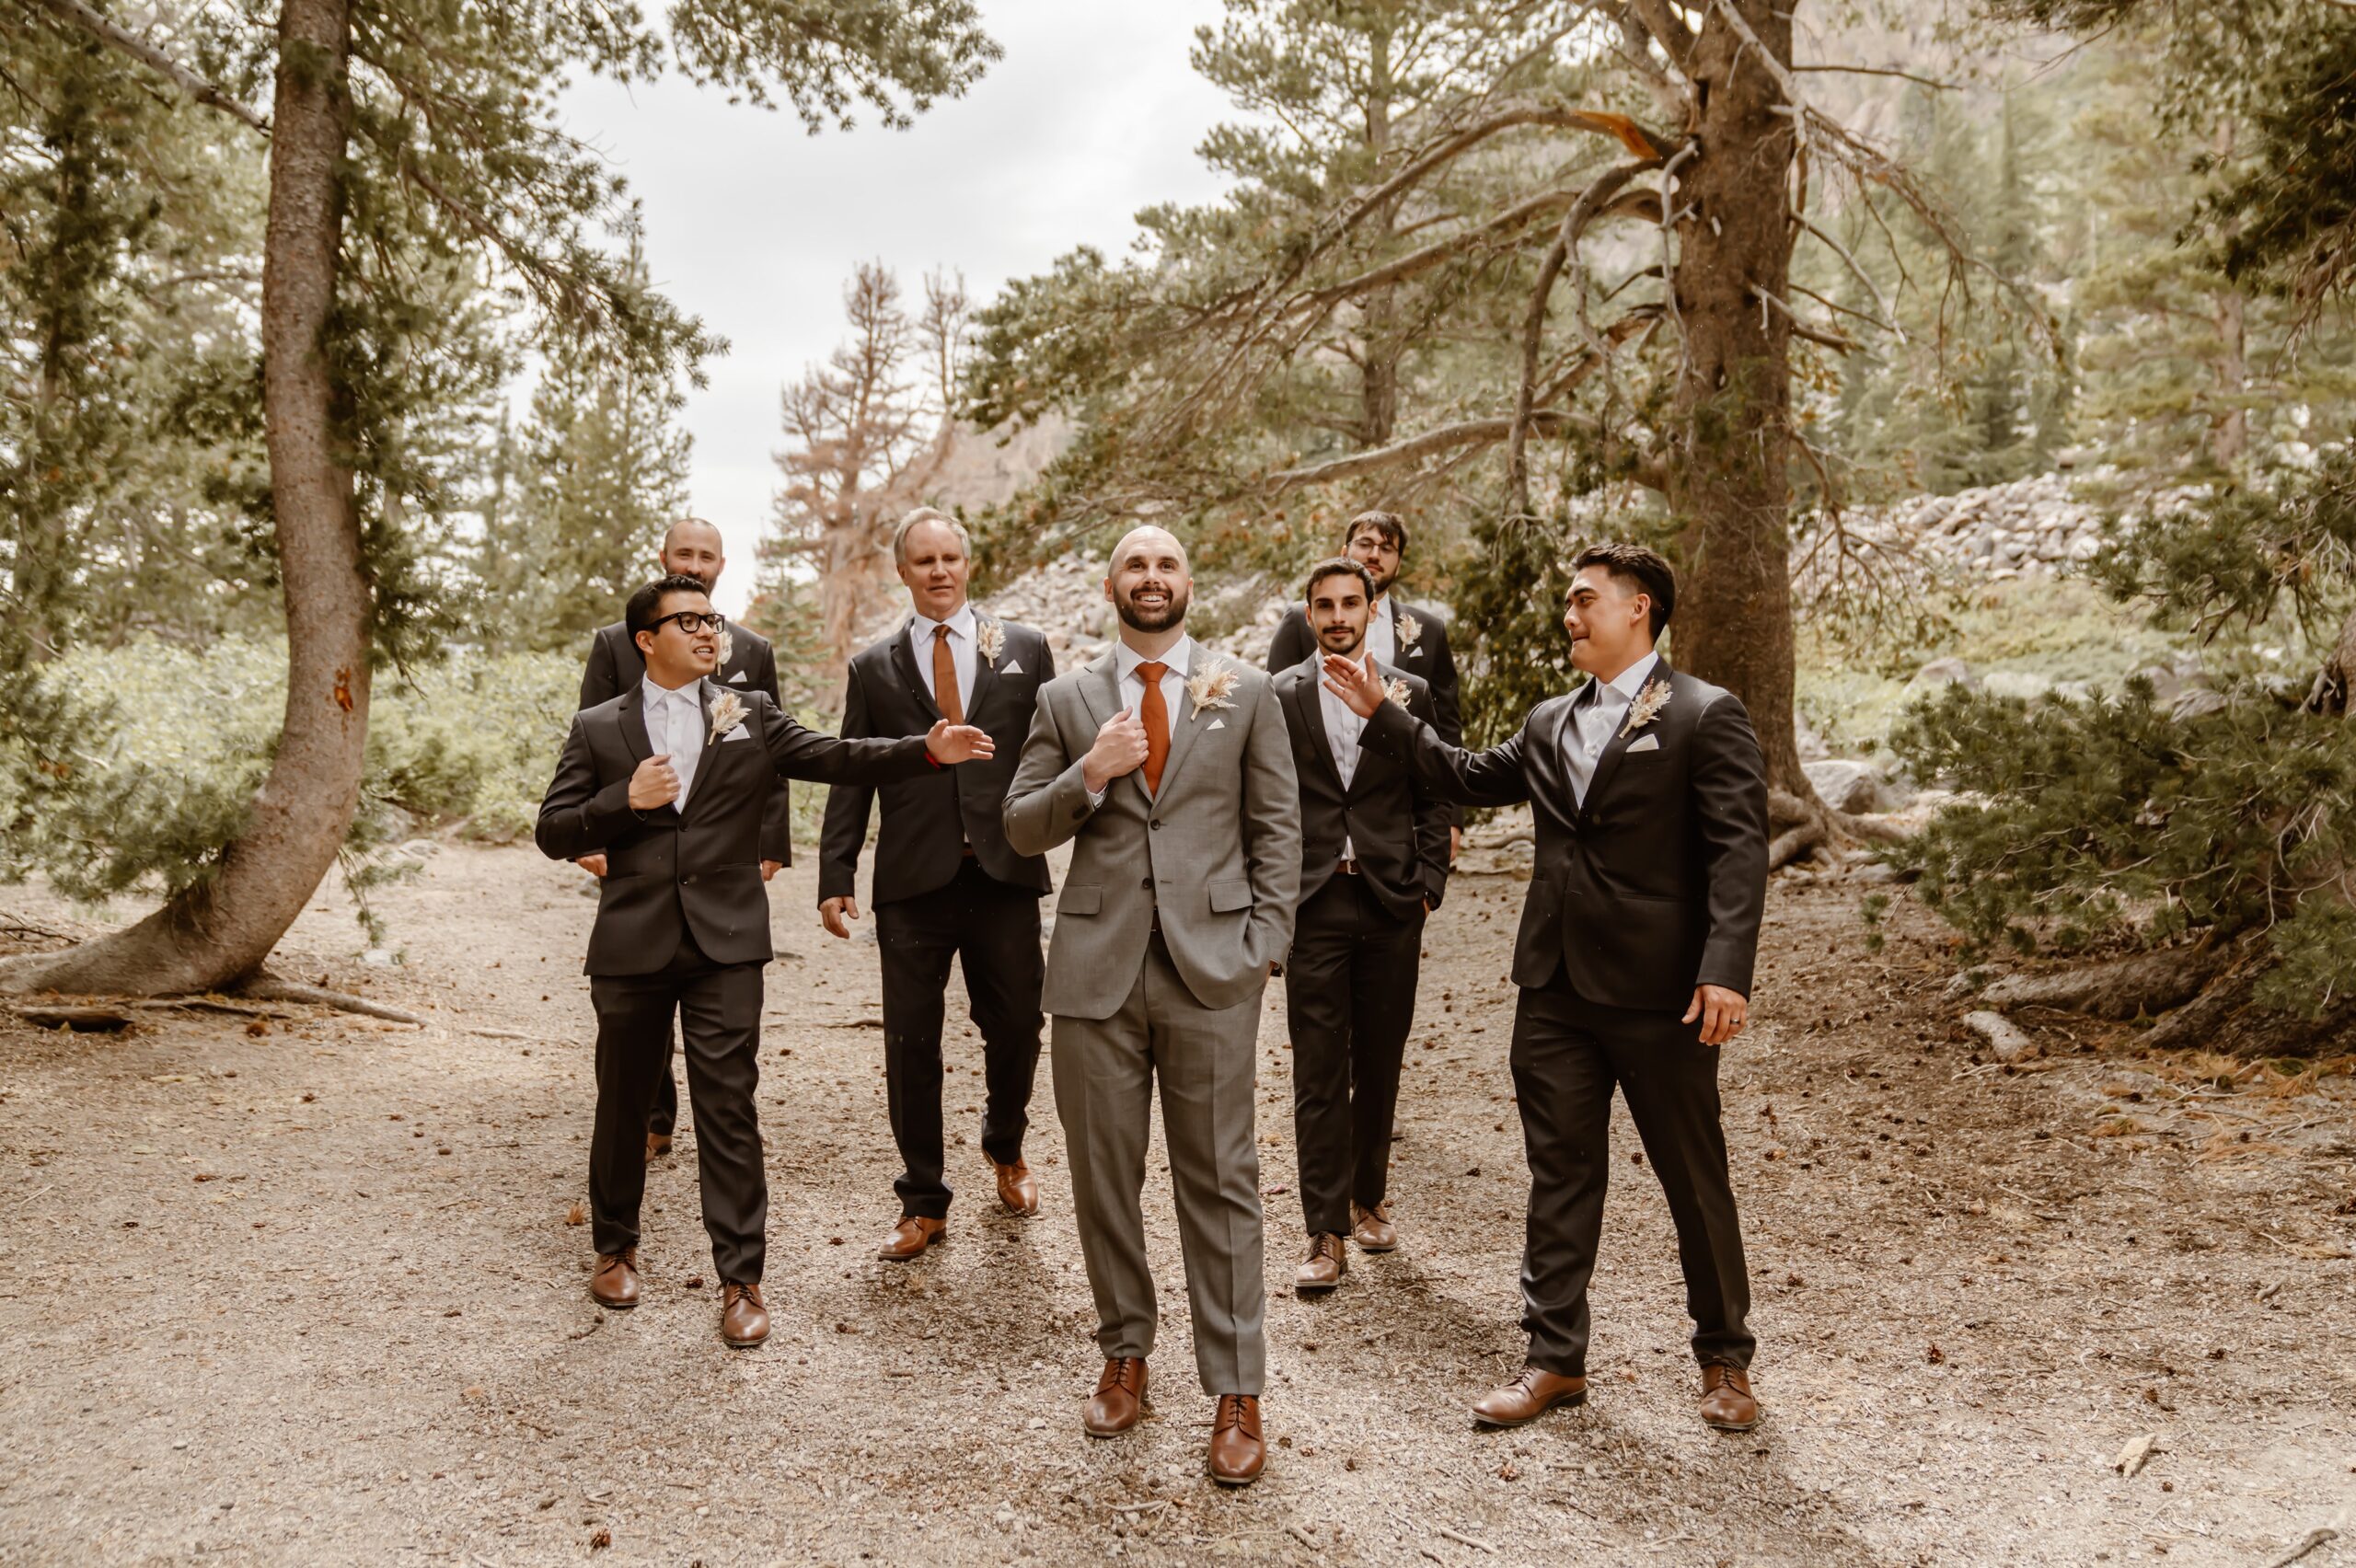 Groom and groomsmen pose for portraits